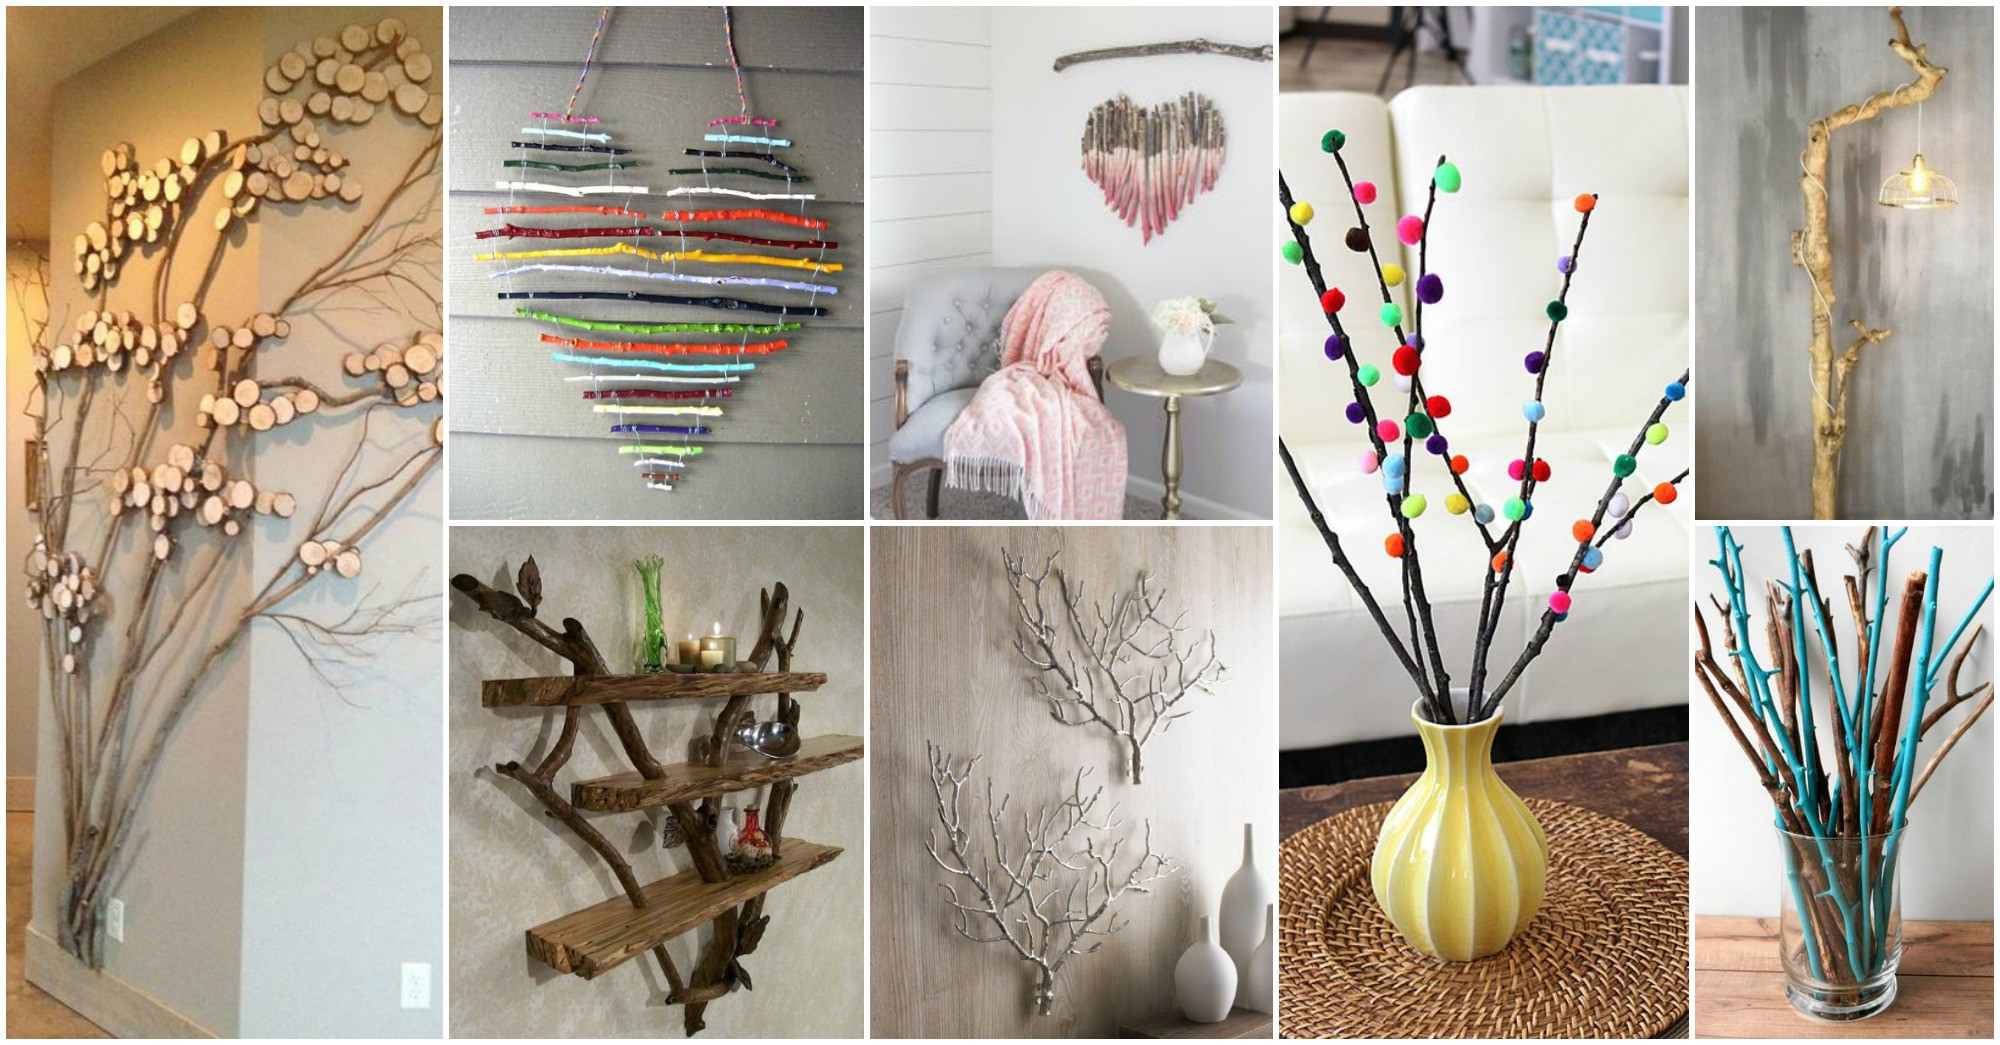 DIY Branch Decor
 DIY Tree Branches Home Decor Ideas That You Will Love to Copy